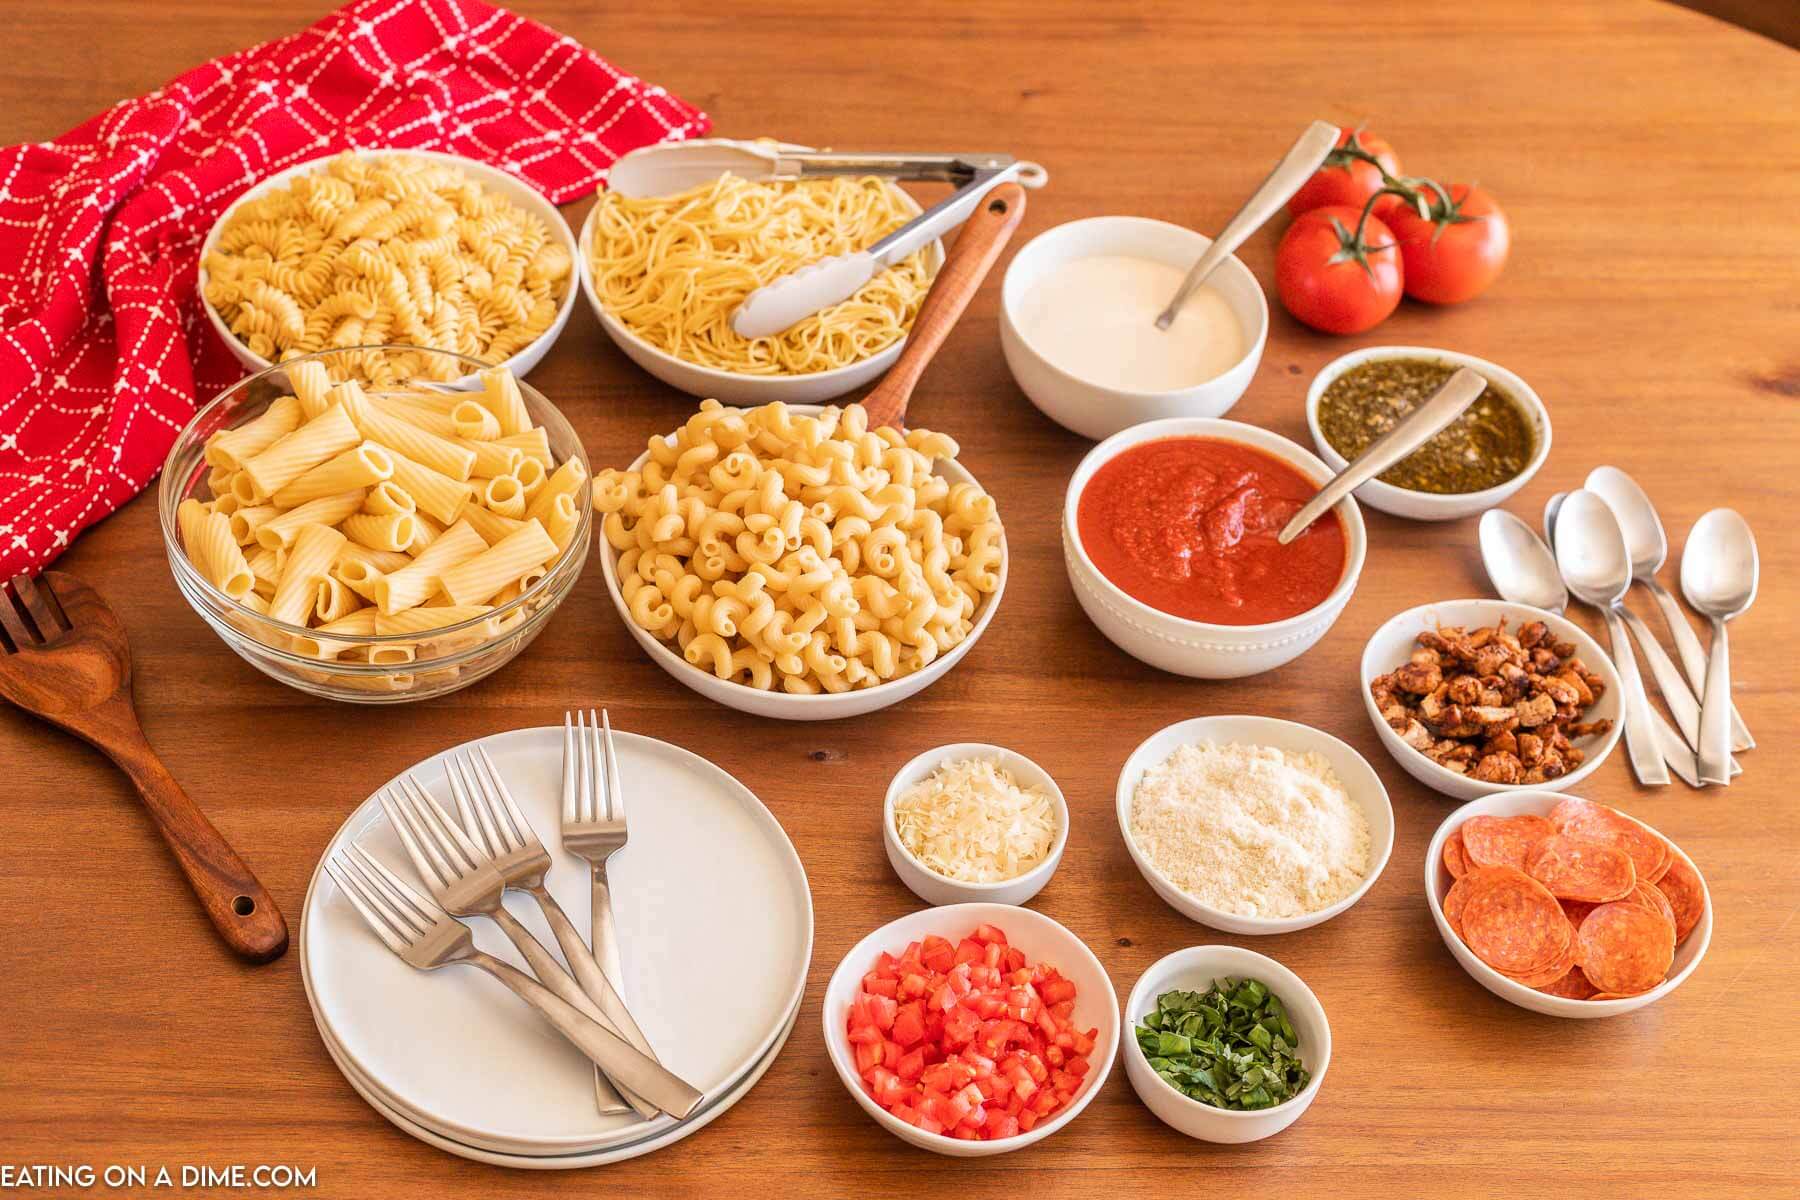 Bowls of pasta, sauces and toppings for a pasta bar